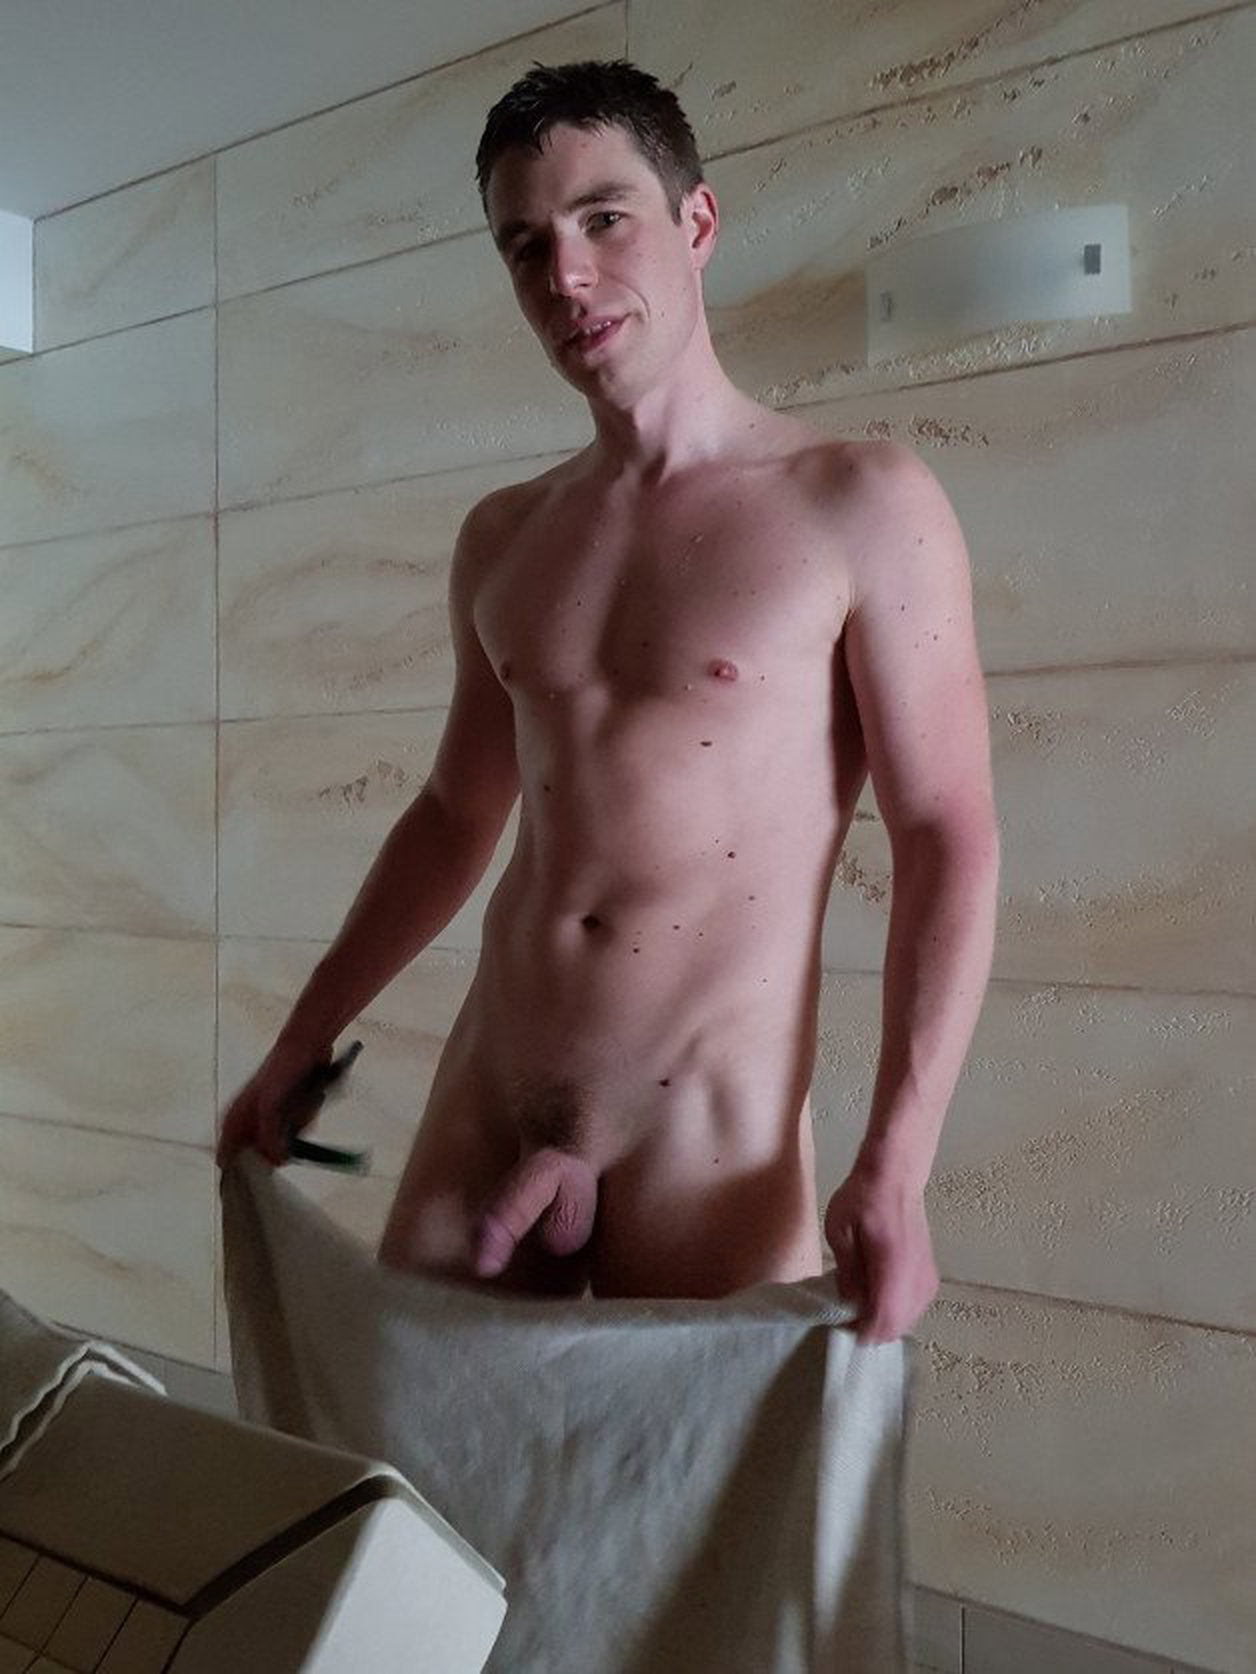 Photo by bigreg with the username @bigreg, who is a verified user,  September 7, 2021 at 10:07 PM. The post is about the topic Sauna Sex and the text says 'Taken by my gf after hot sauna session'